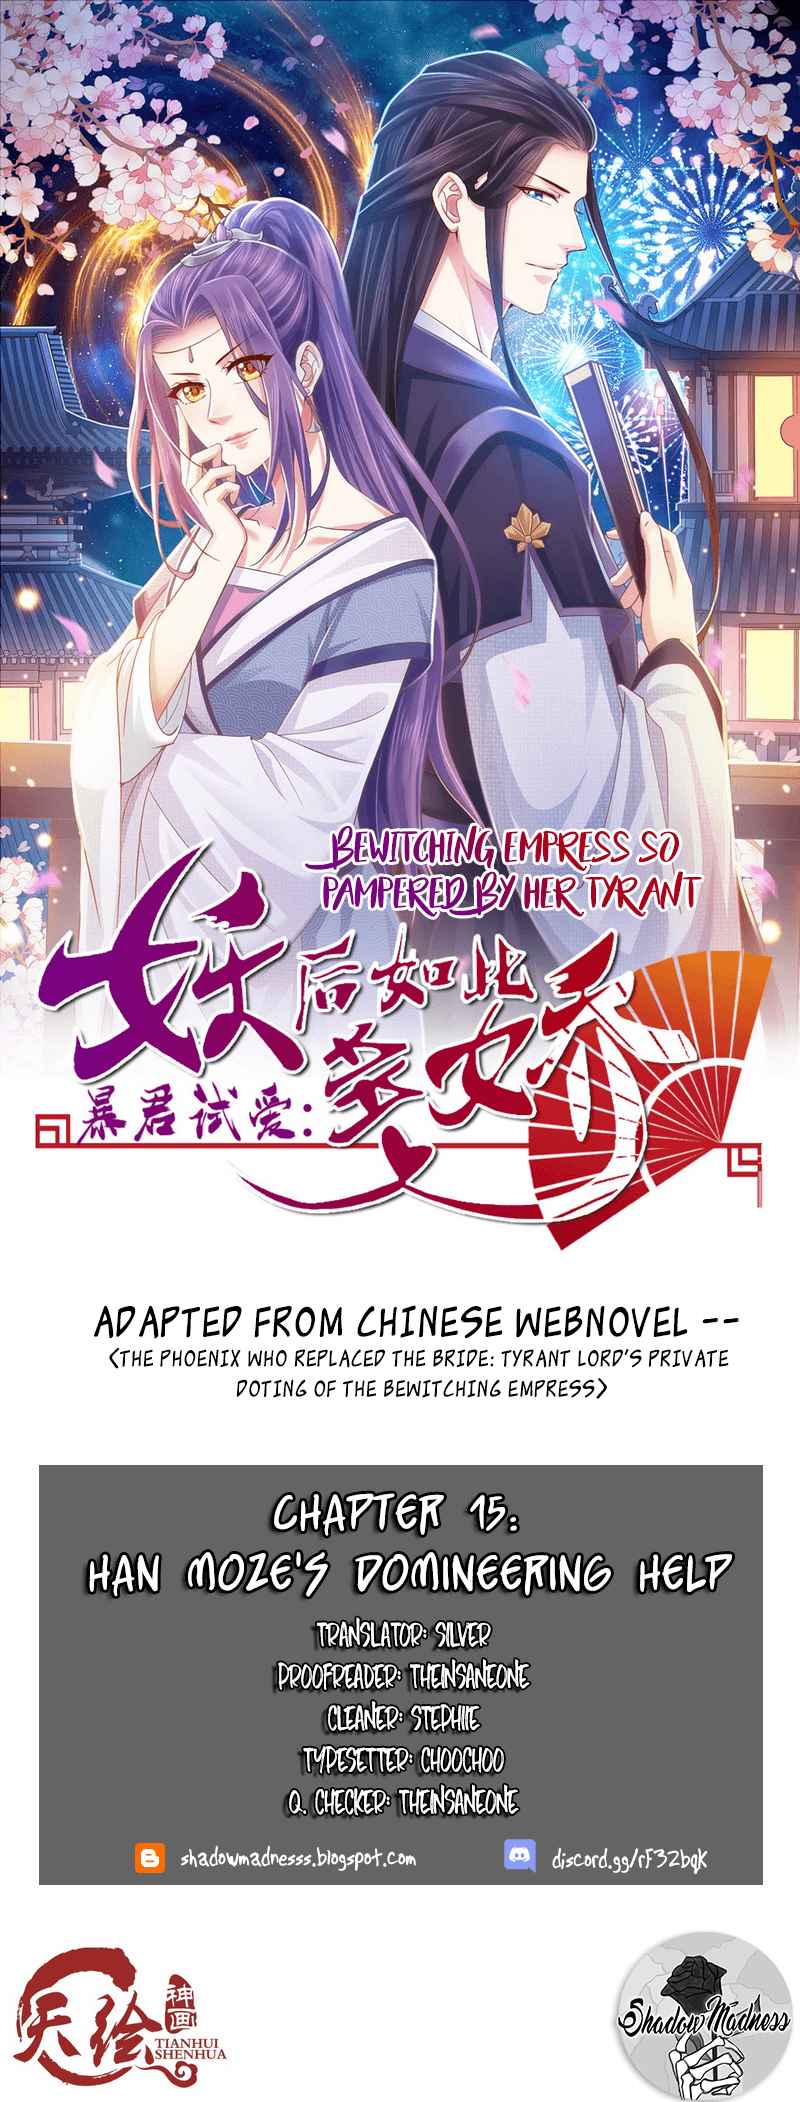 Bewitching Empress So Pampered by Her Tyrant Ch. 15 Han Moze's domineering help